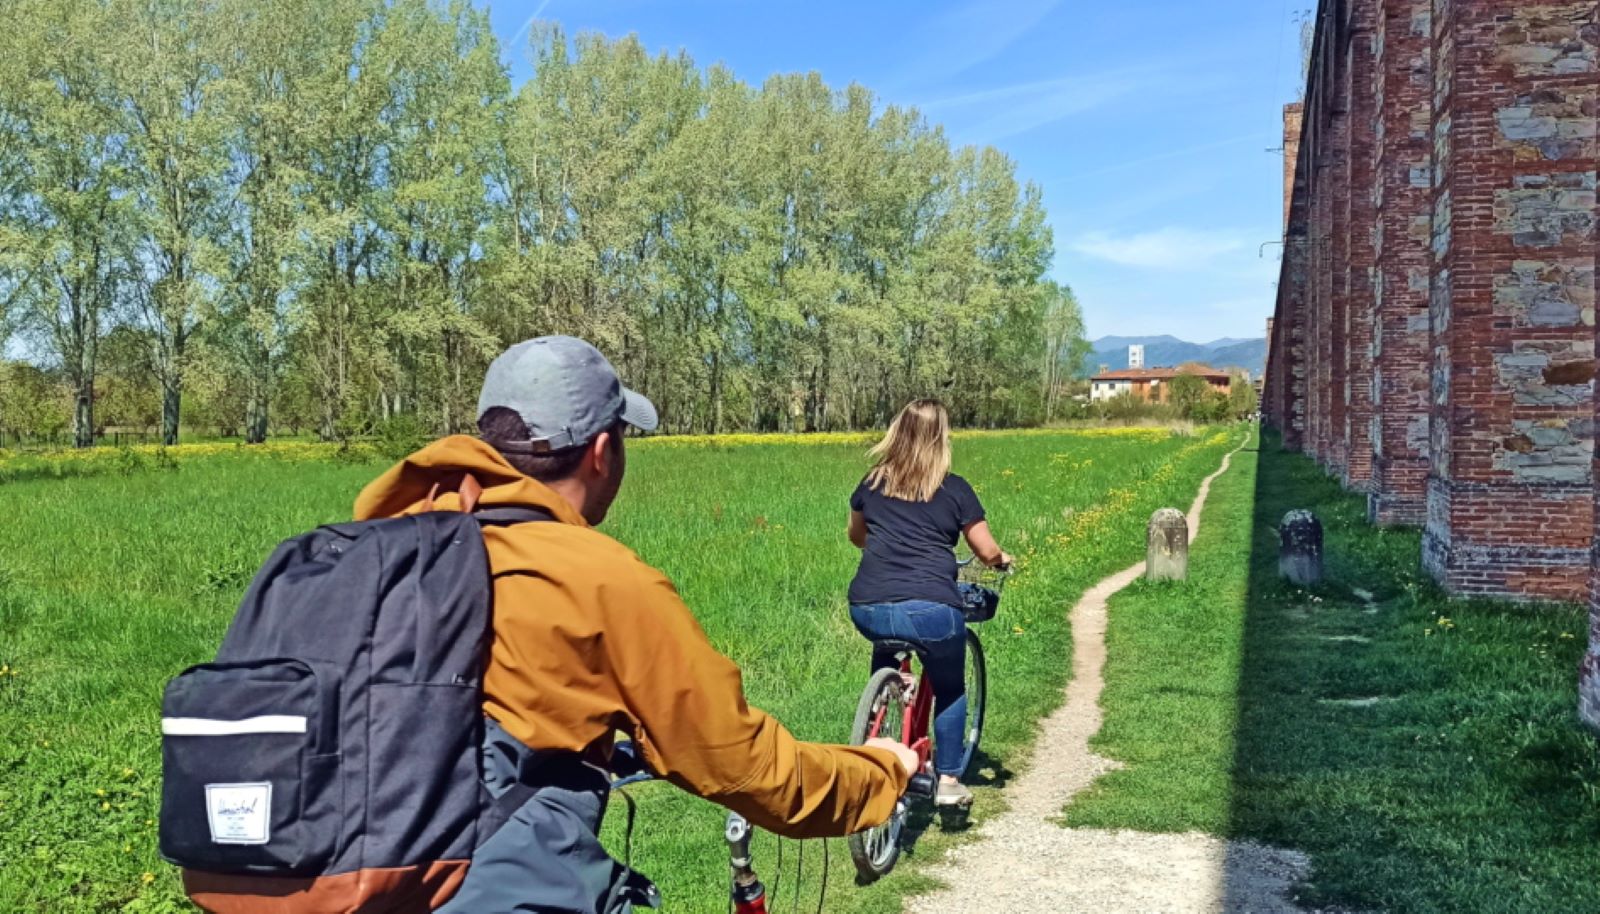 Tour the waterway, cycling just outside the city of Lucca